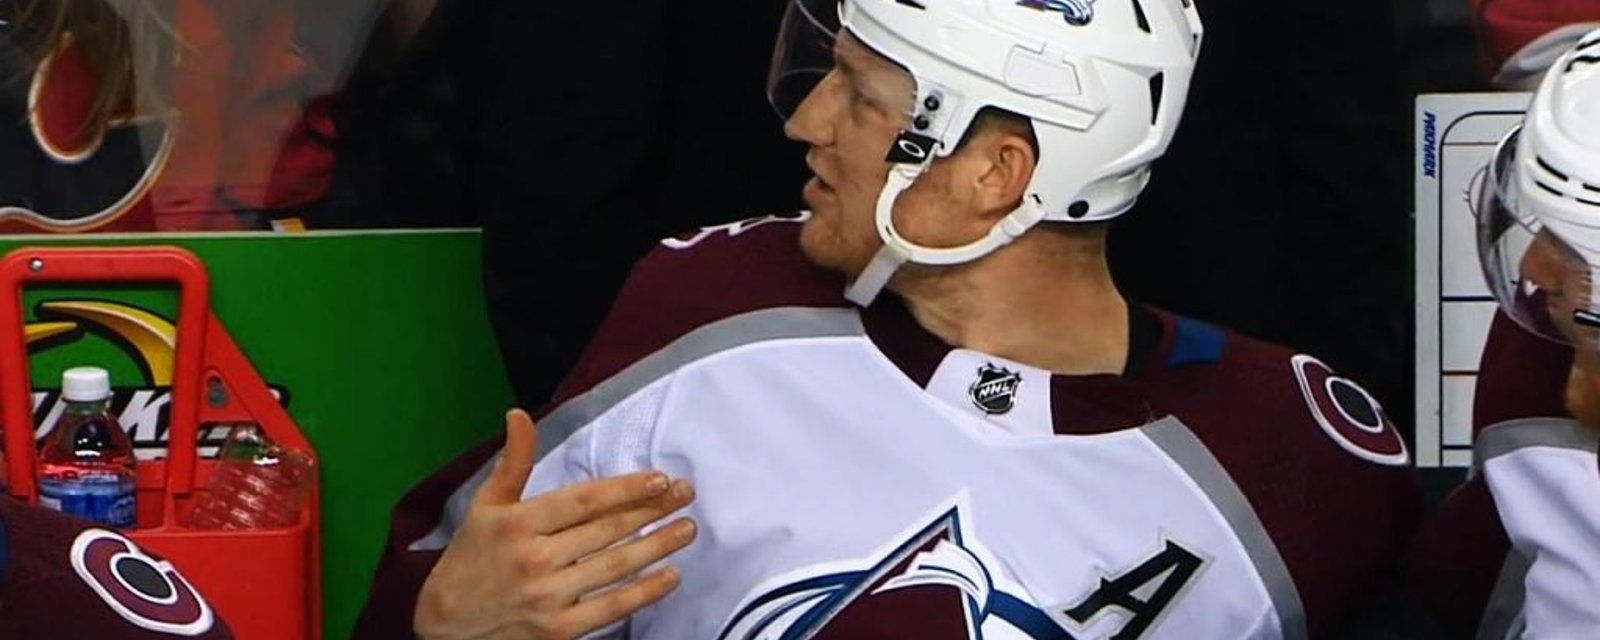 Embarrassing picture of MacKinnon emerges ahead of Game 1 against the Sharks